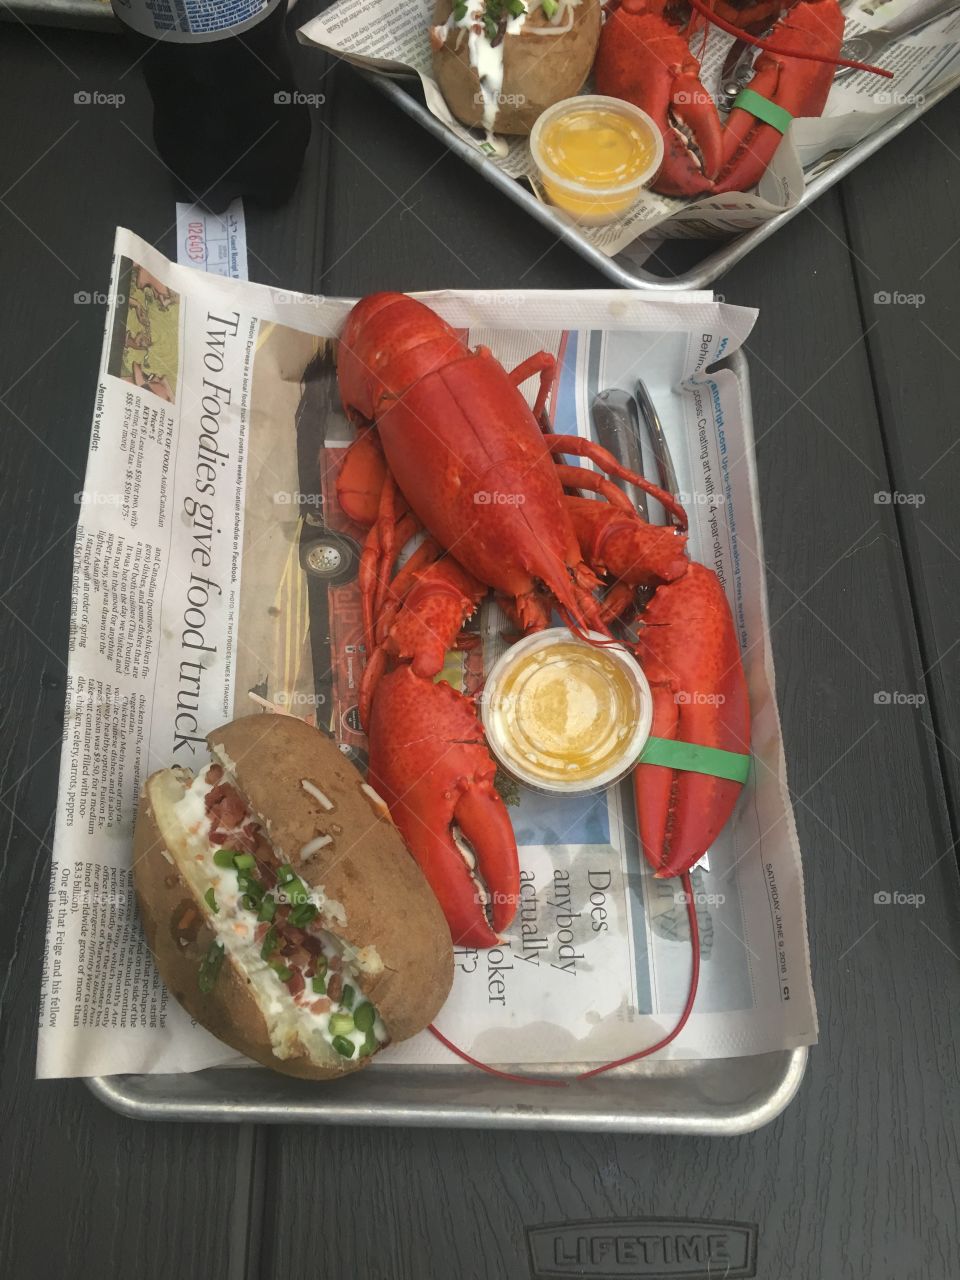 Ver juicy lobster and loaded baked potato in Nova Scotia